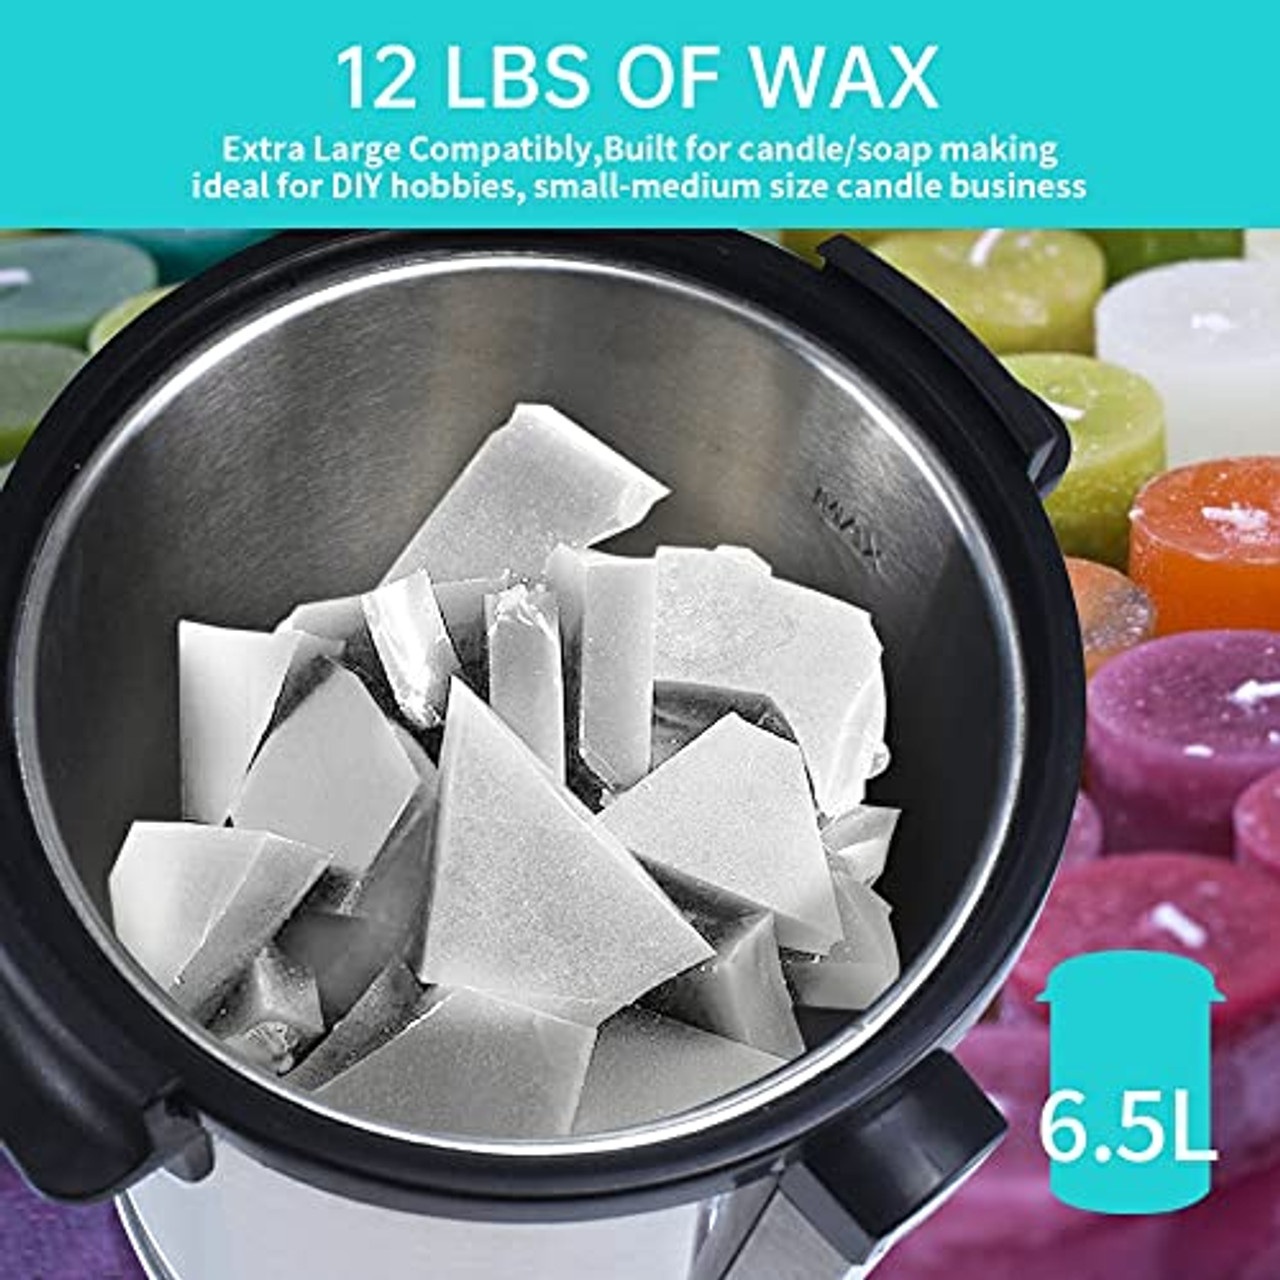 Best Wax Melter For Candle Making: Tested & Reviewed in 2022